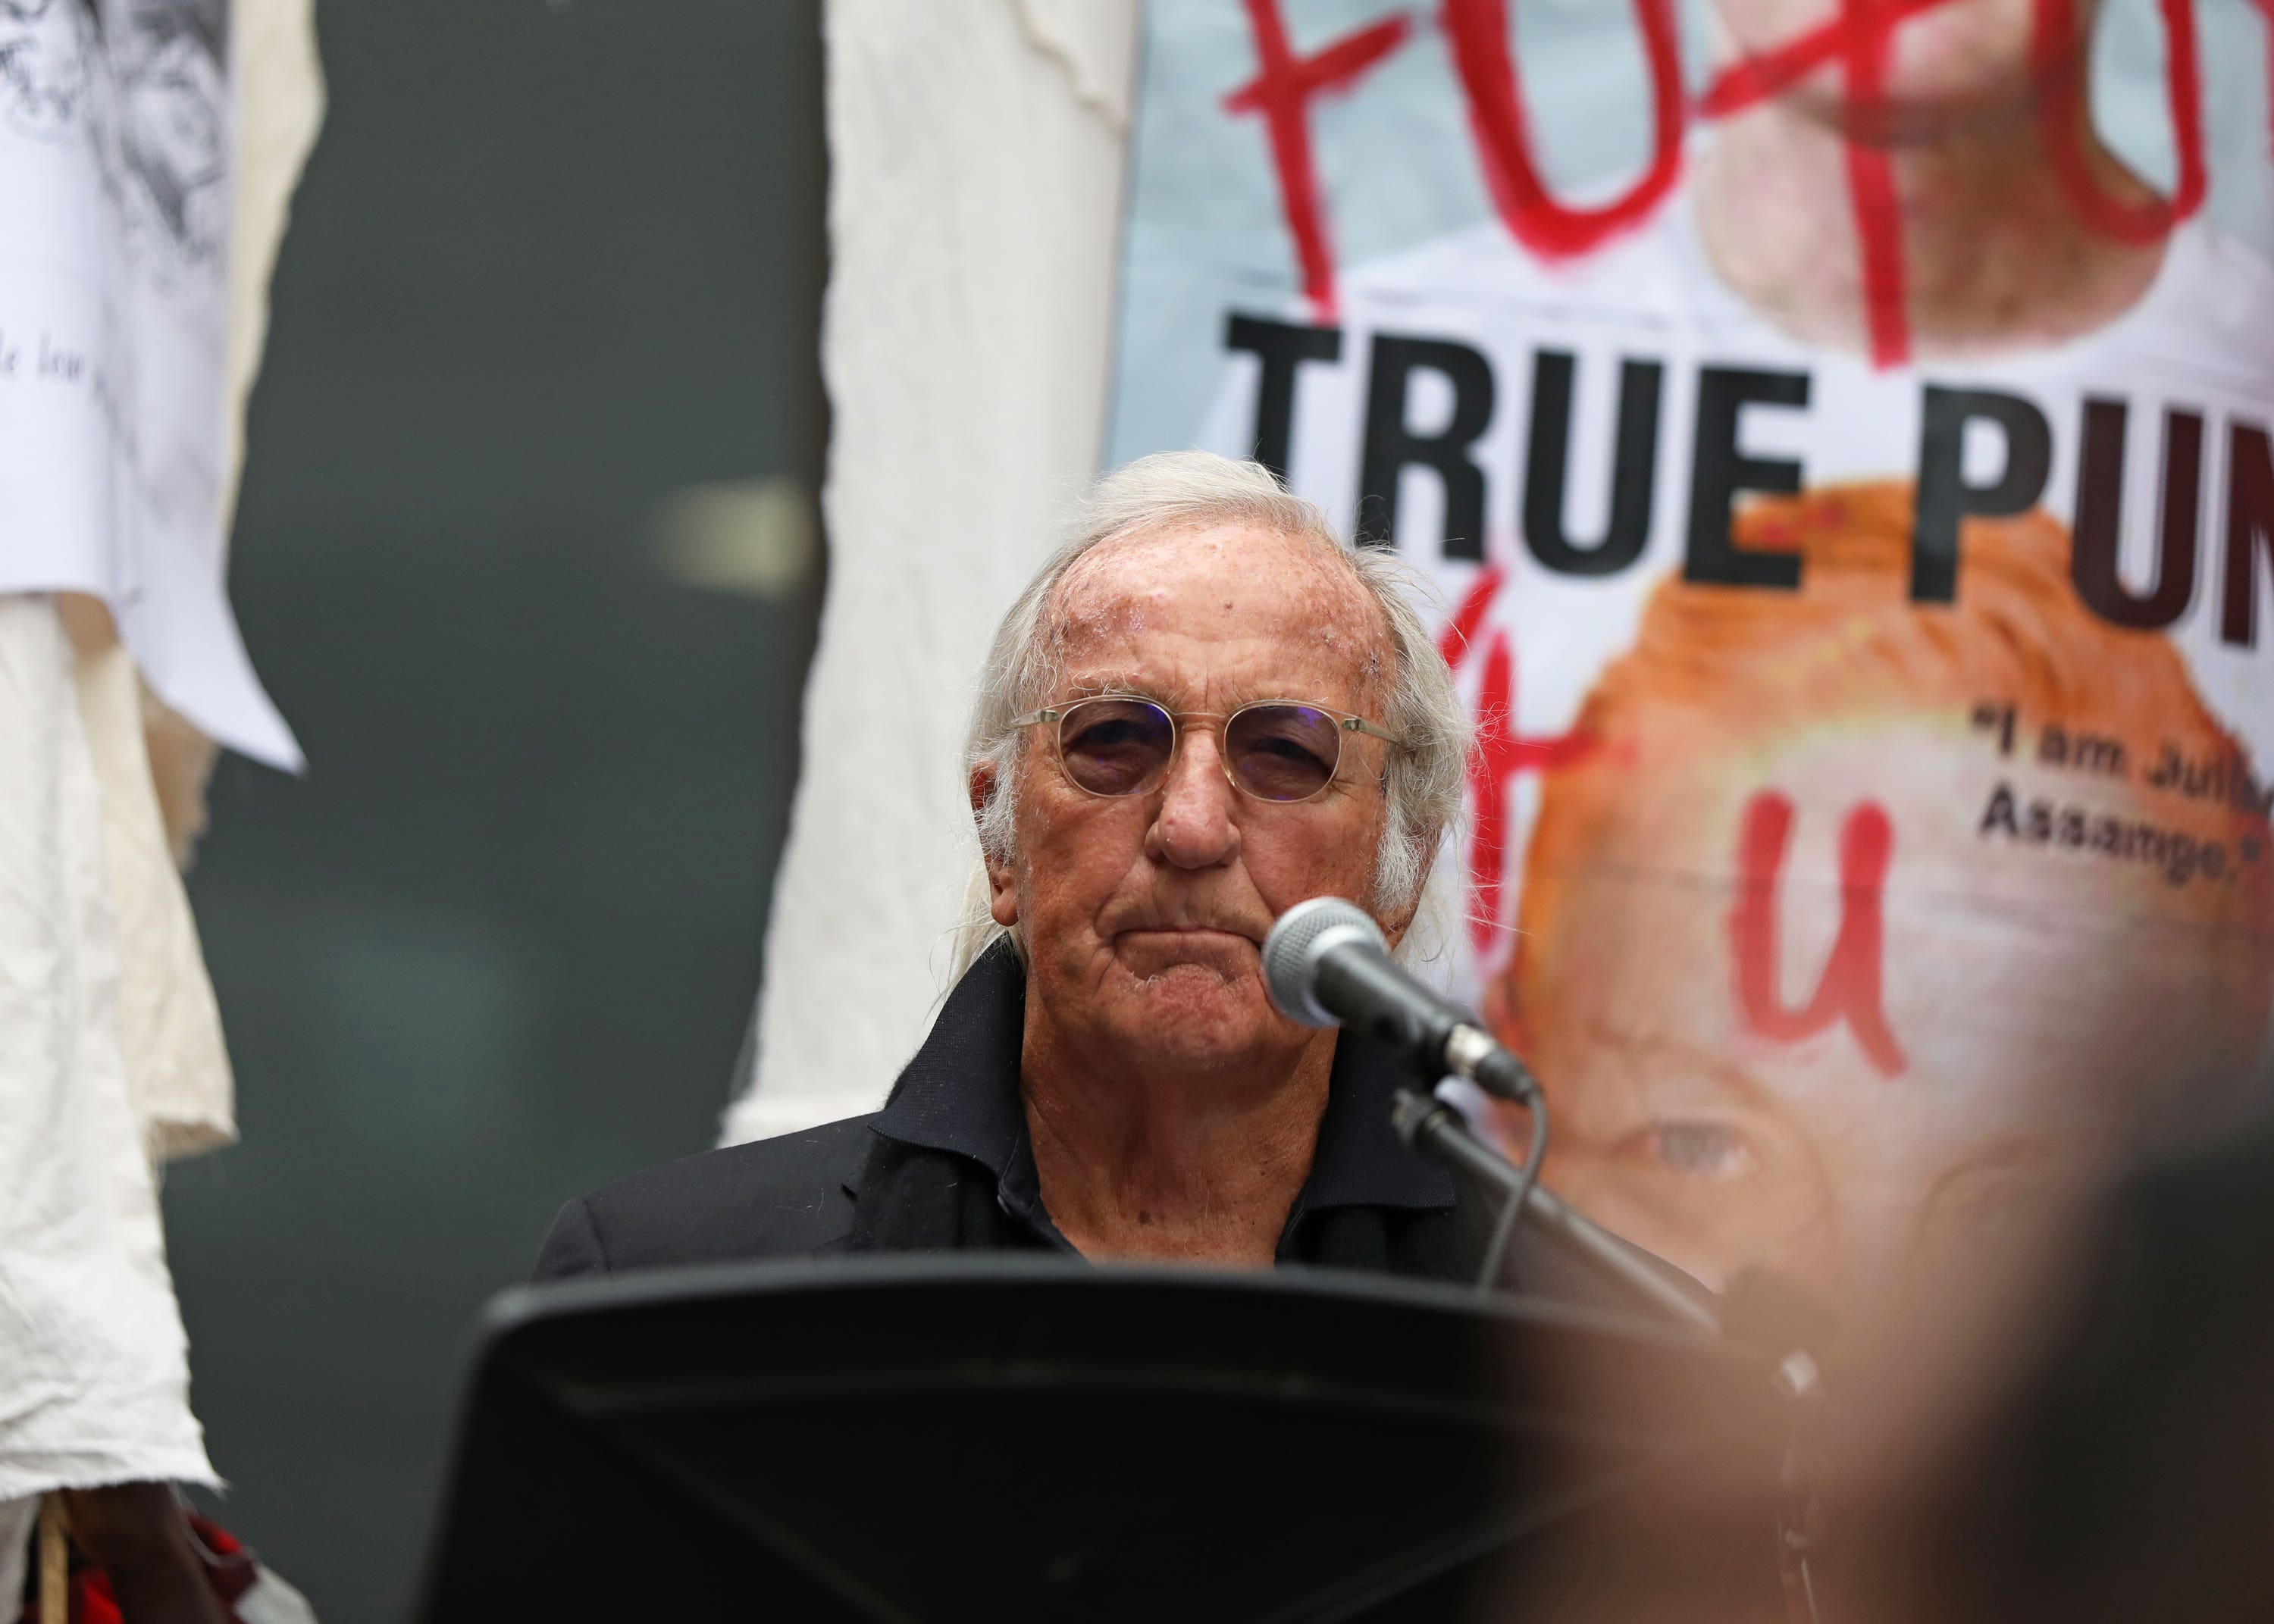 John Pilger speaking outside the Old Bailey before a hearing in Wikileaks founder Julian Assange’s battle against extradition to the US (PA).